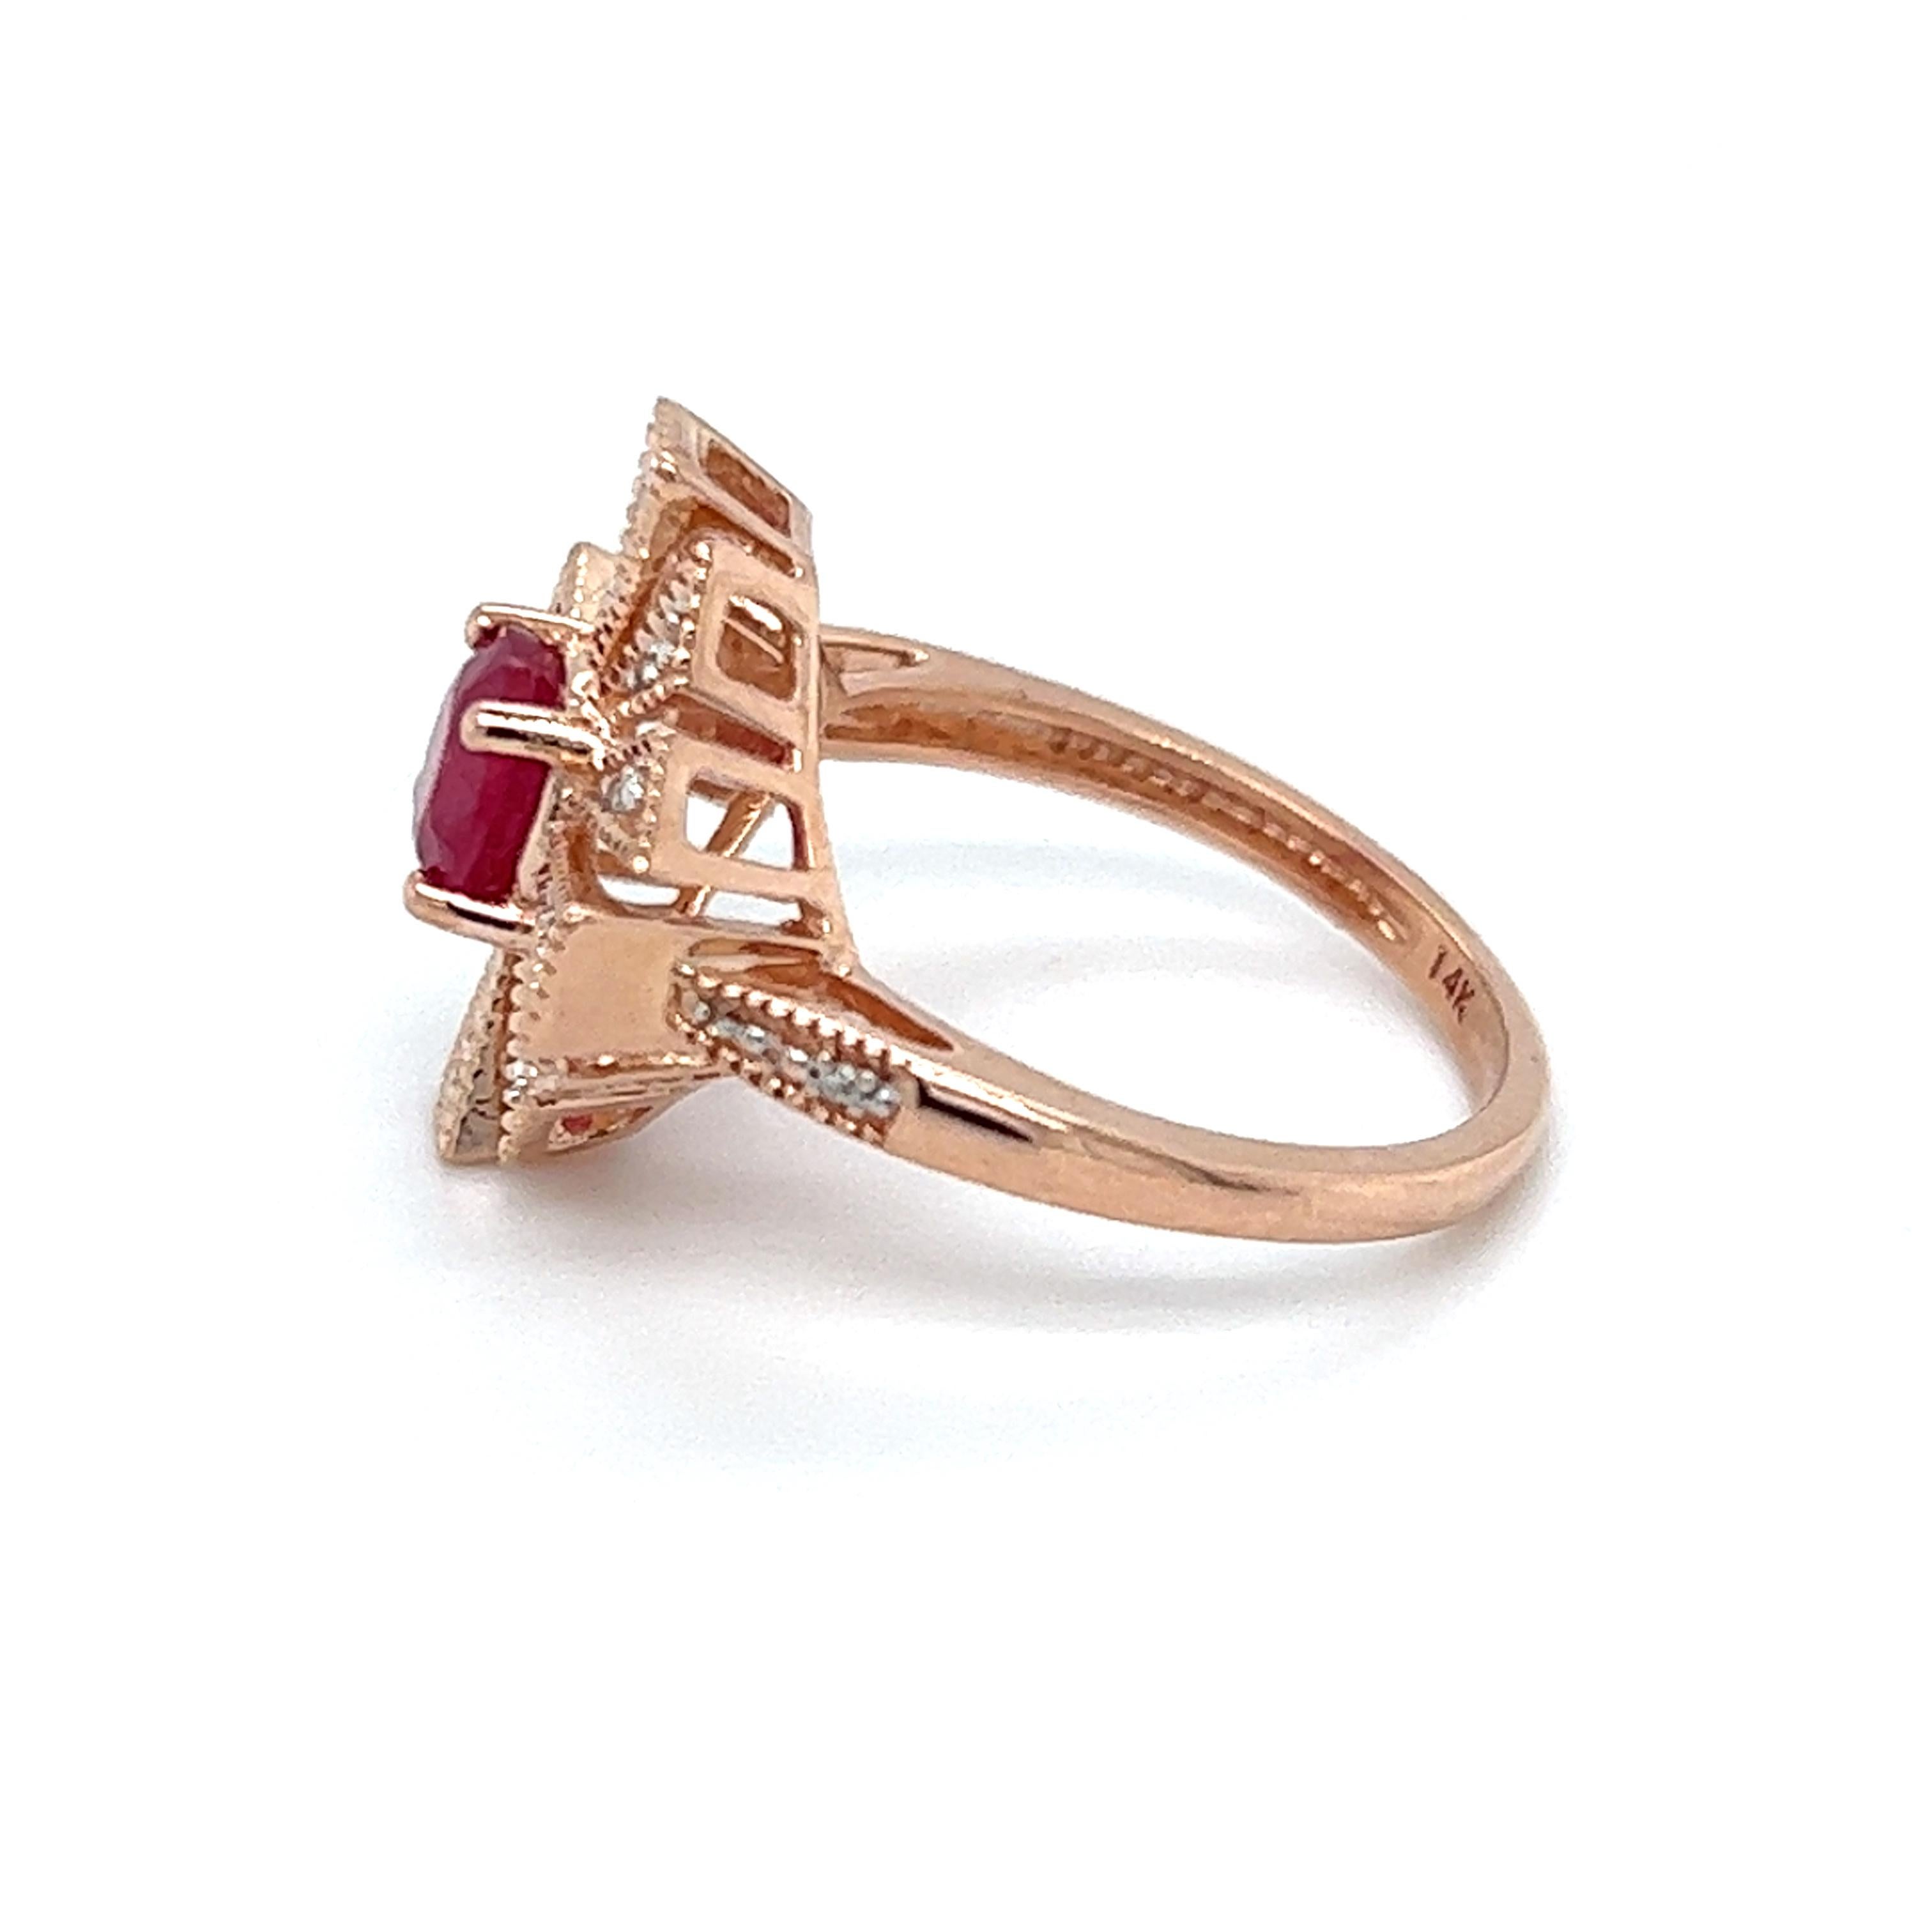 Round Cut Natural Ruby and Diamond Ring in 14K Rose Gold